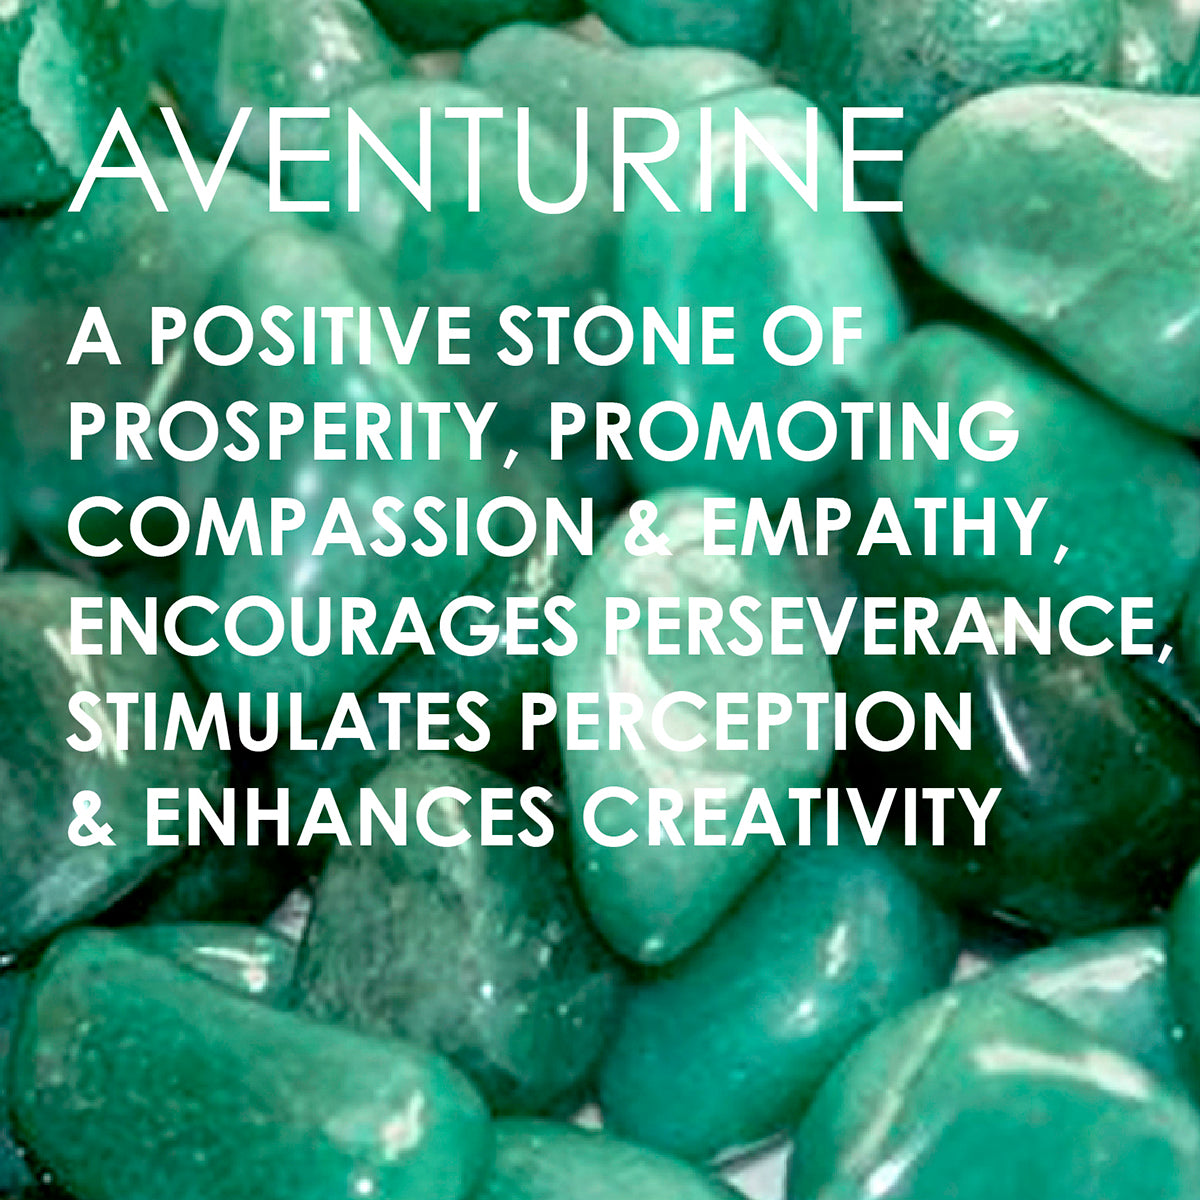  An image featuring multiple pieces of green aventurine stone with overlaid text that reads: "AVENTURINE - A POSITIVE STONE OF PROSPERITY, PROMOTING COMPASSION & EMPATHY, ENCOURAGES PERSEVERANCE, STIMULATES PERCEPTION & ENHANCES CREATIVITY.